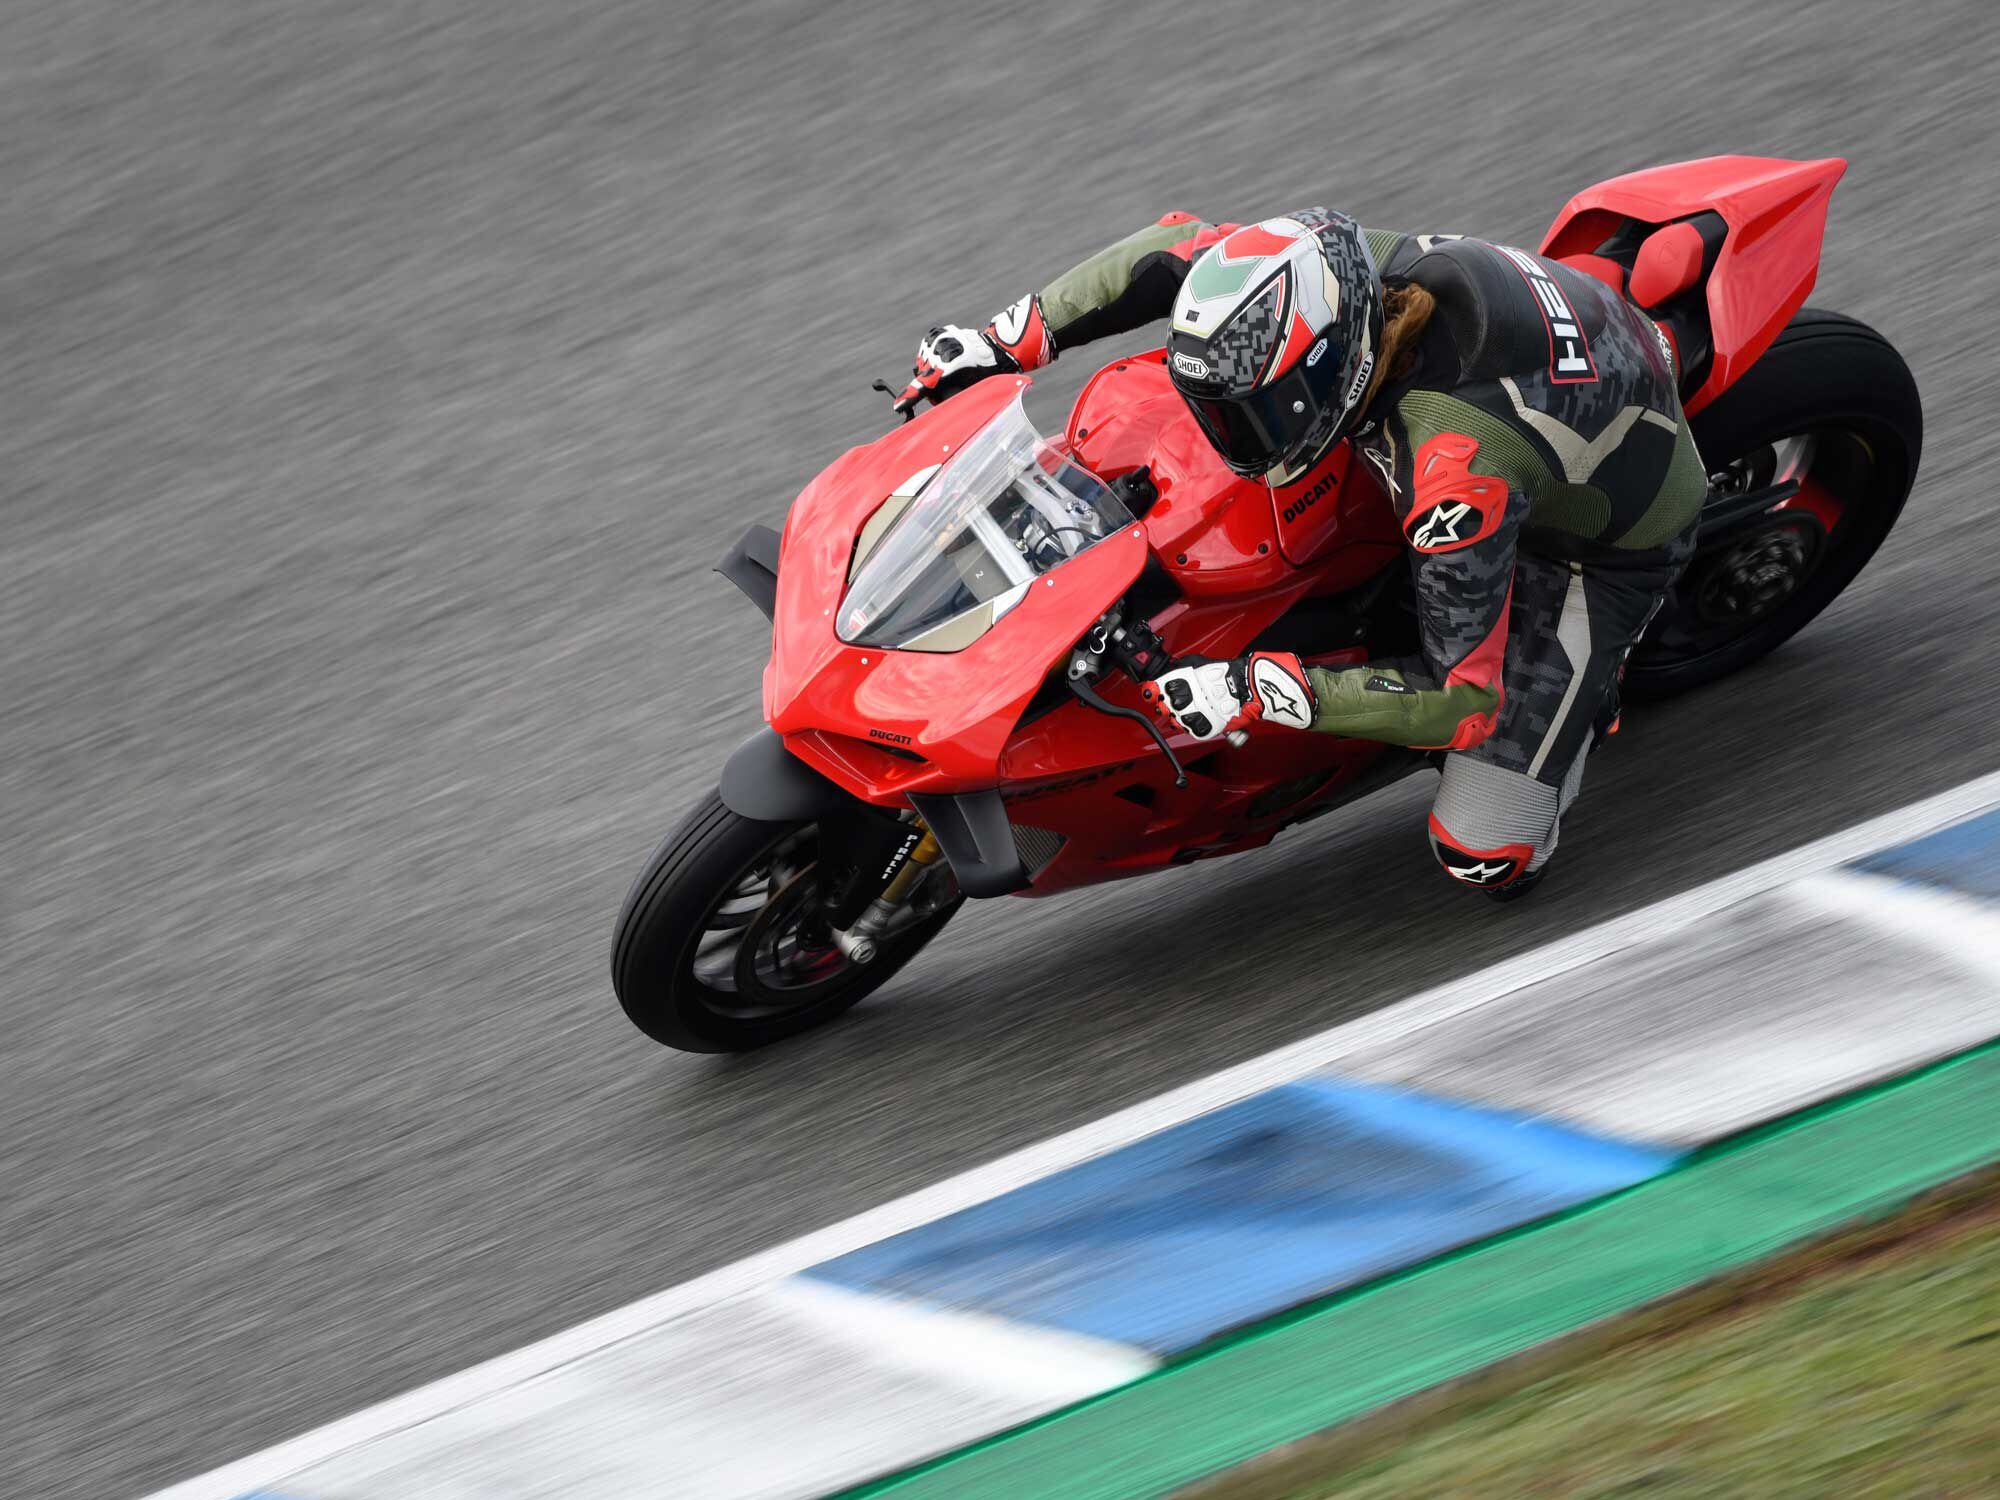 We swing a leg over Ducati’s more refined Panigale V4 S superbike in this first ride from the official press introduction in southern Spain.